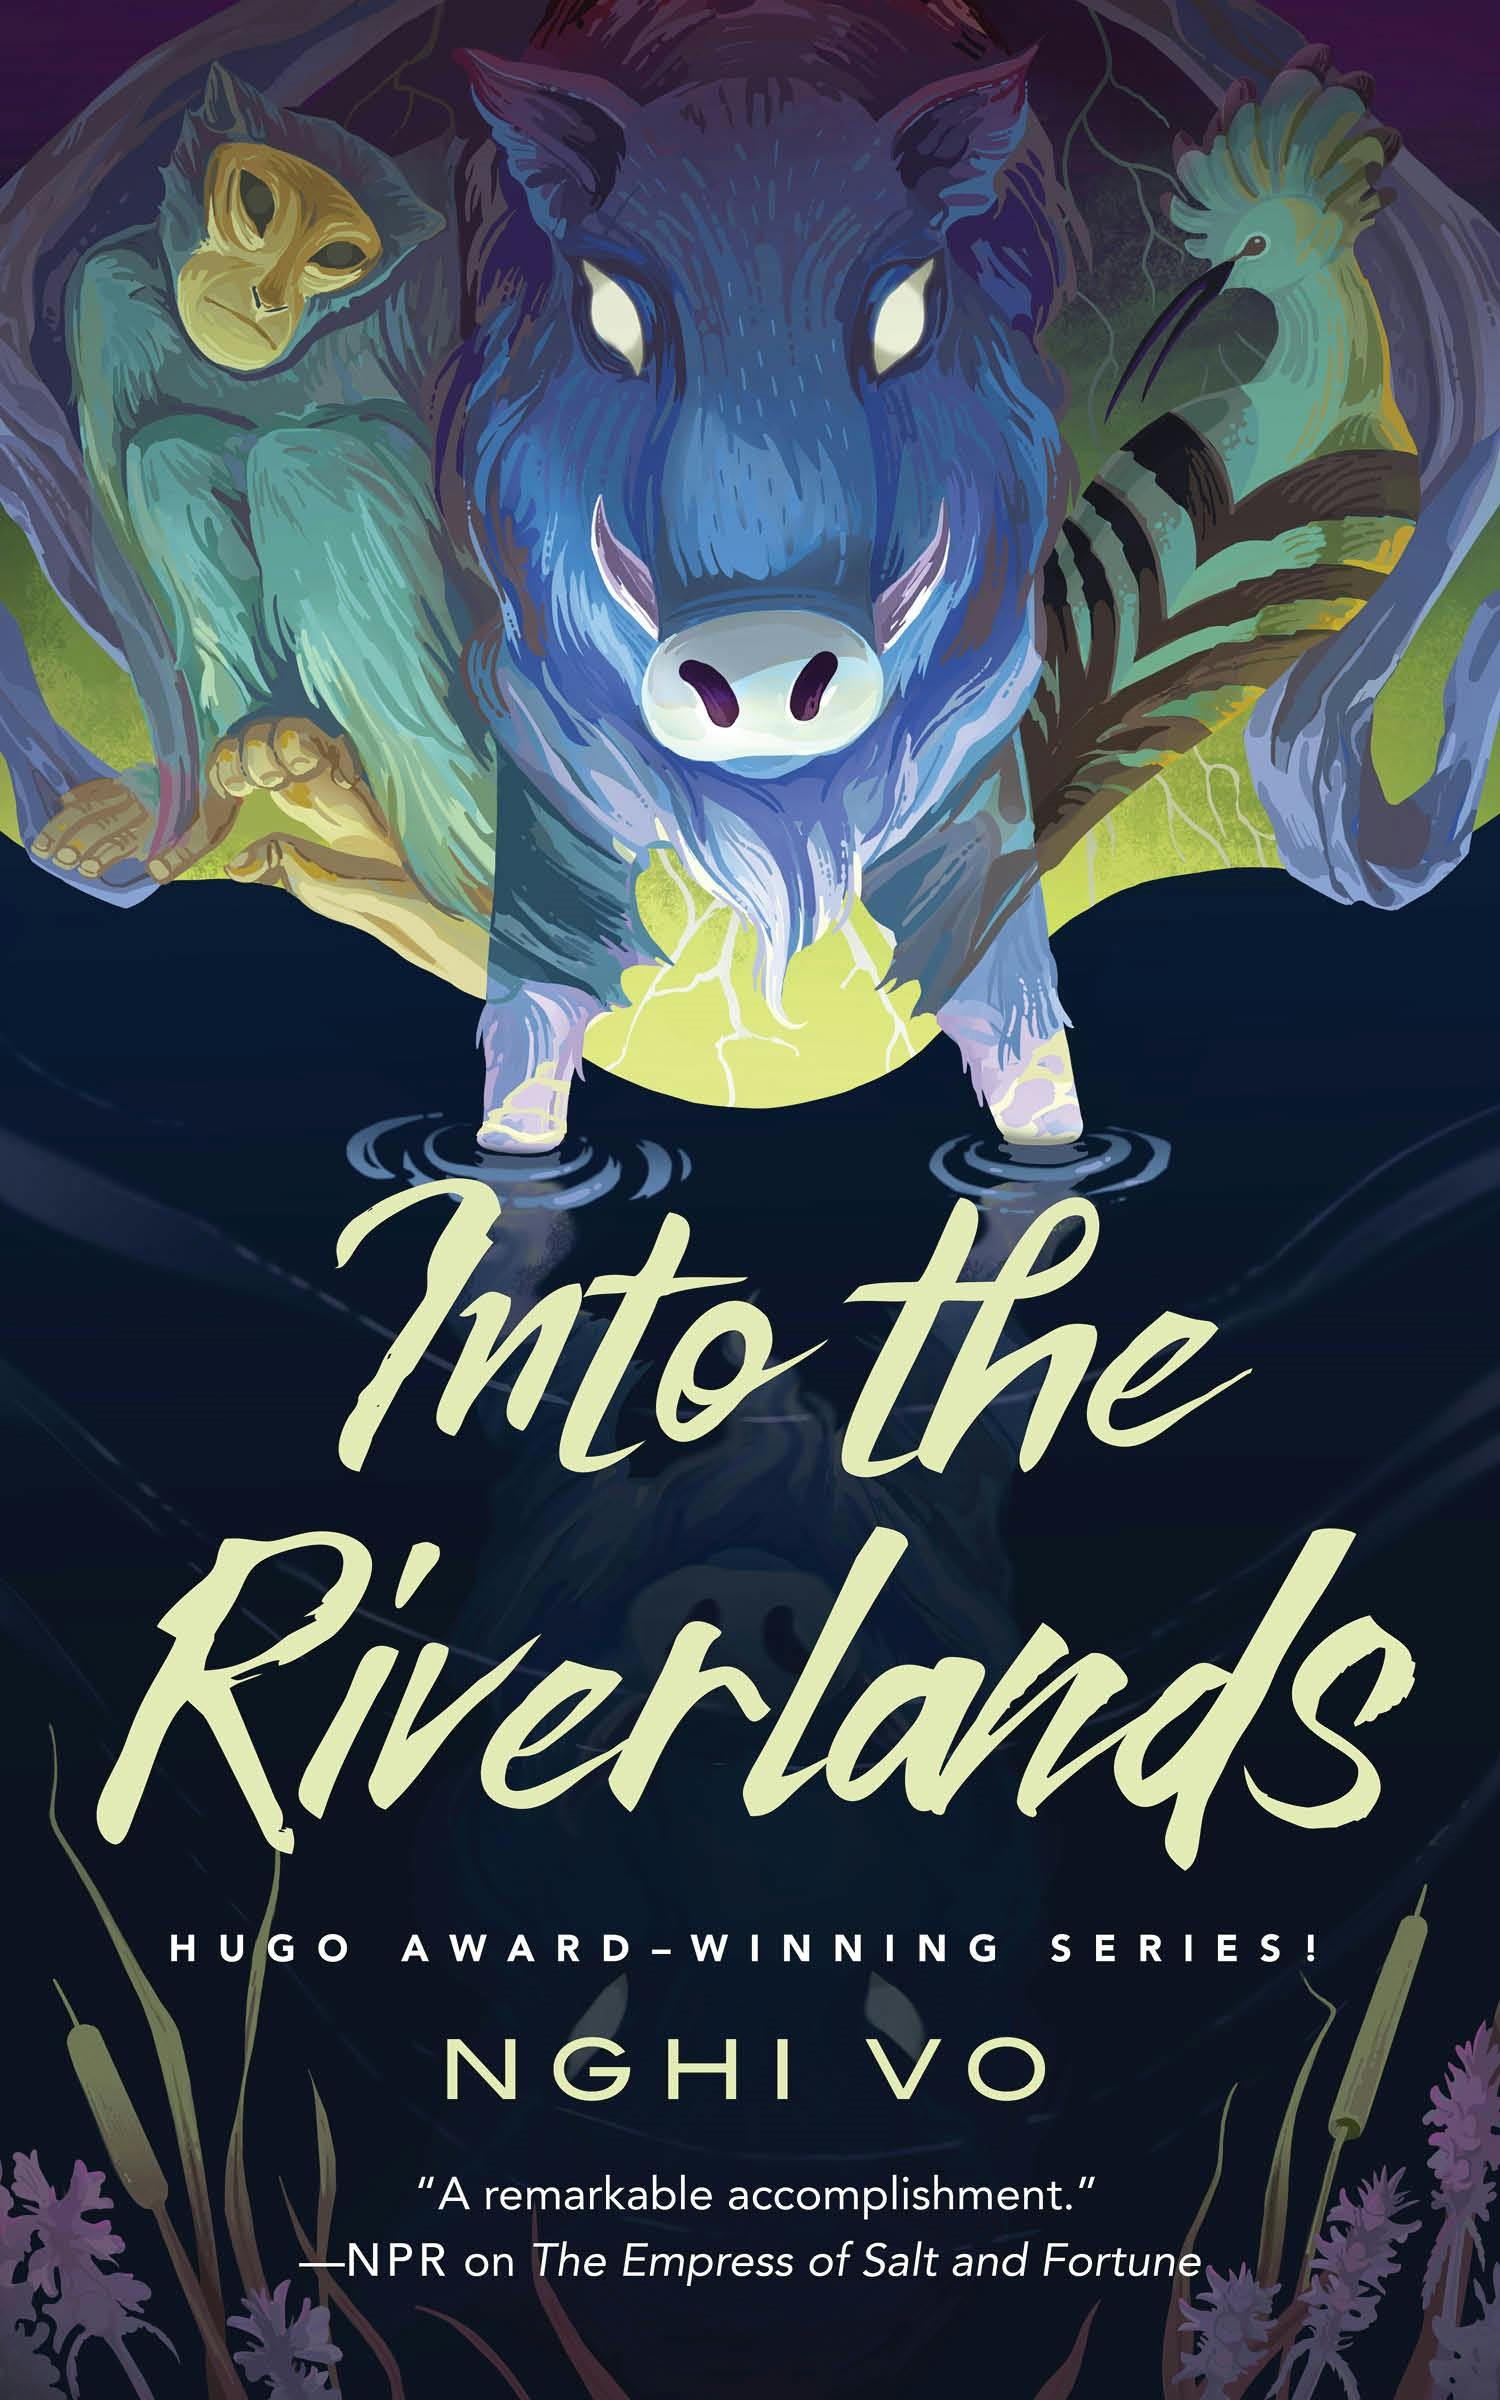 Cover for the book titled as: Into the Riverlands